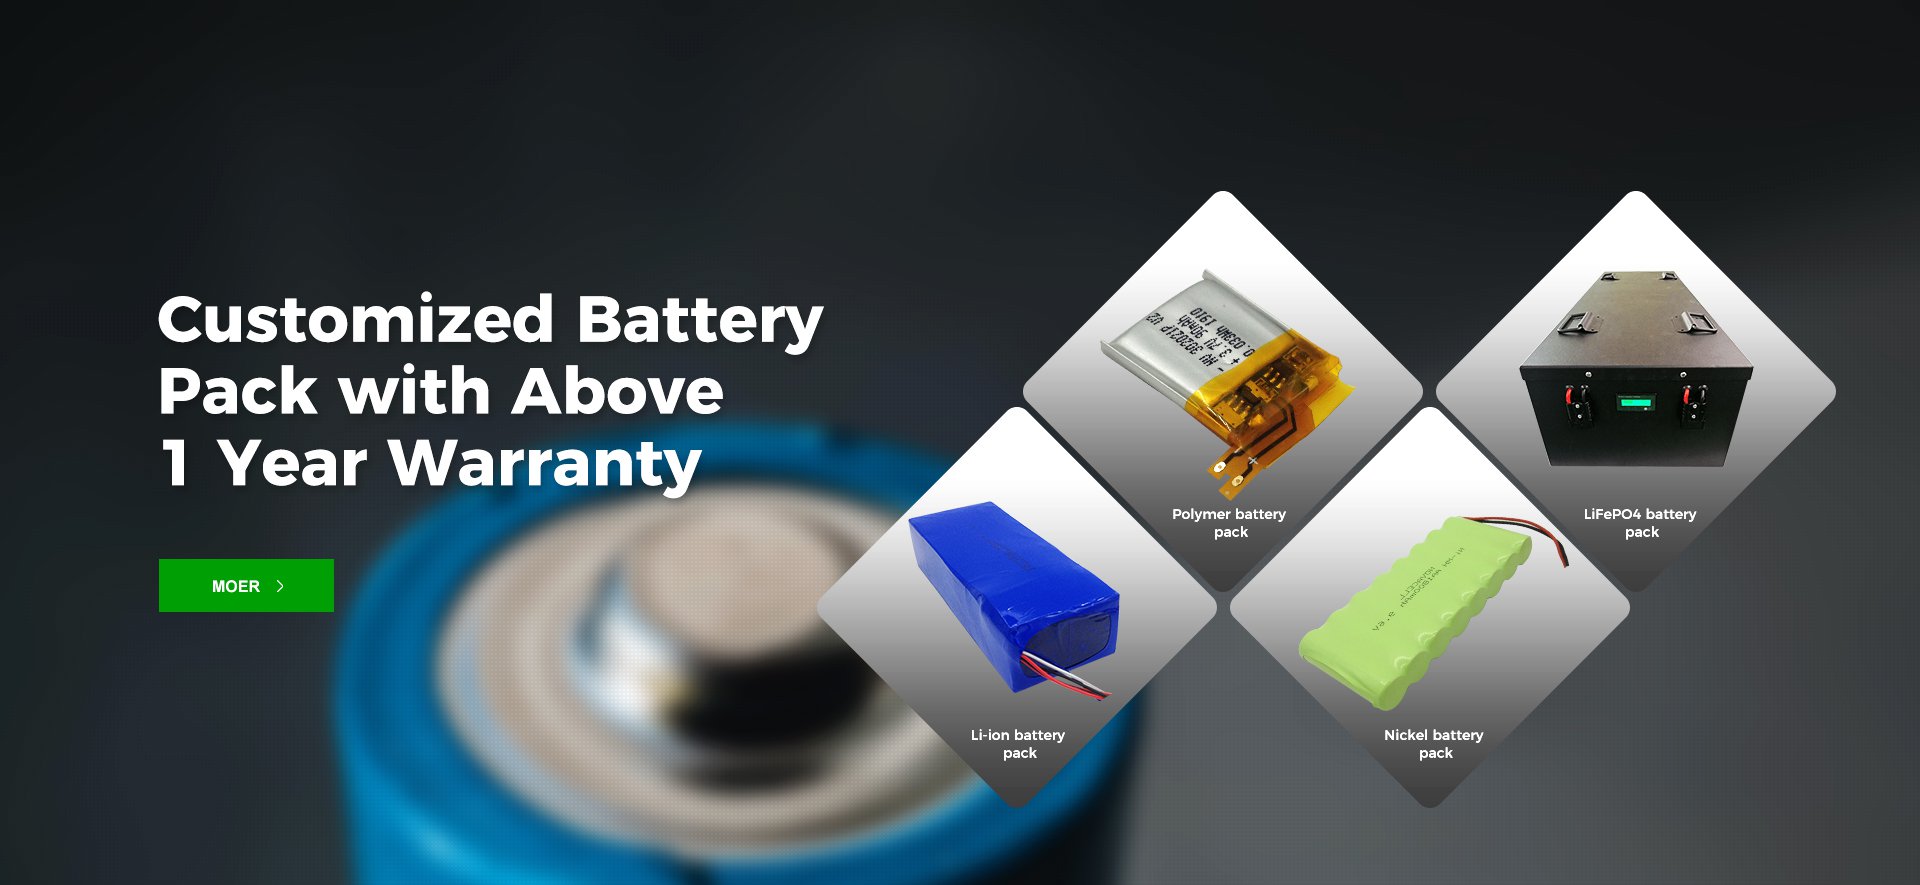 Customized Battery Pack with Above 1Year Warranty